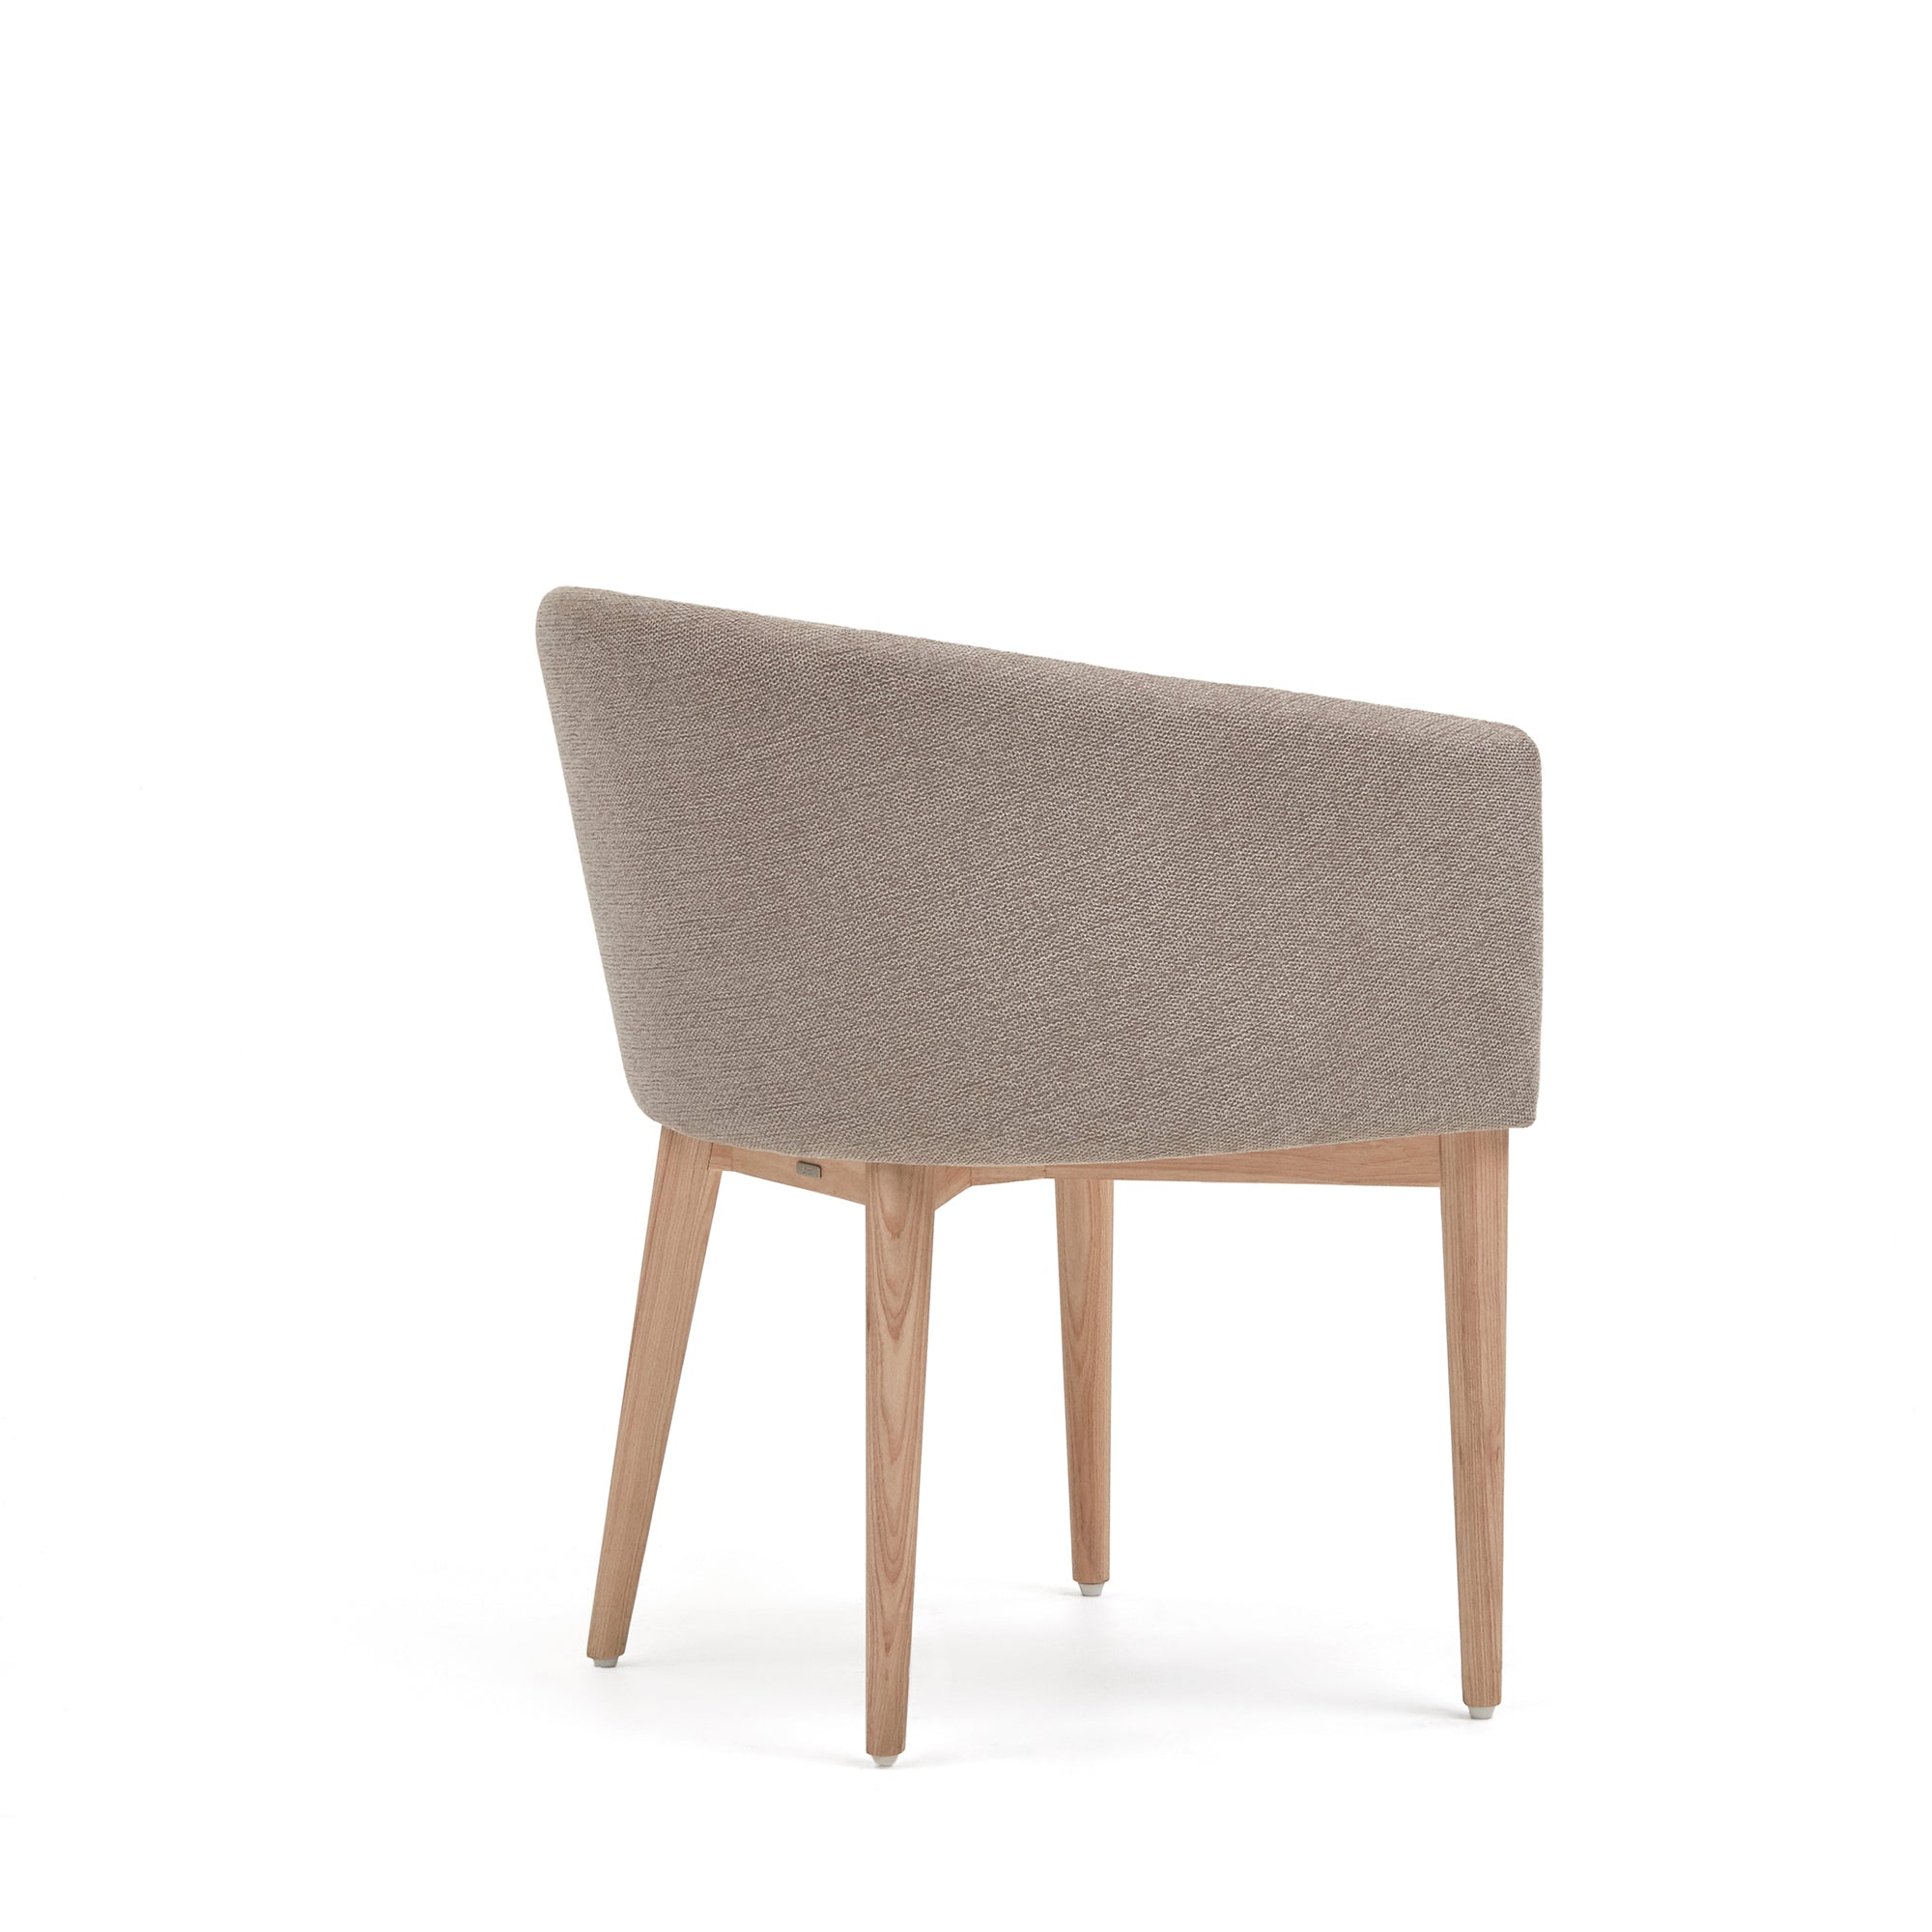 Harlan brown chenille chair with solid ash wood legs